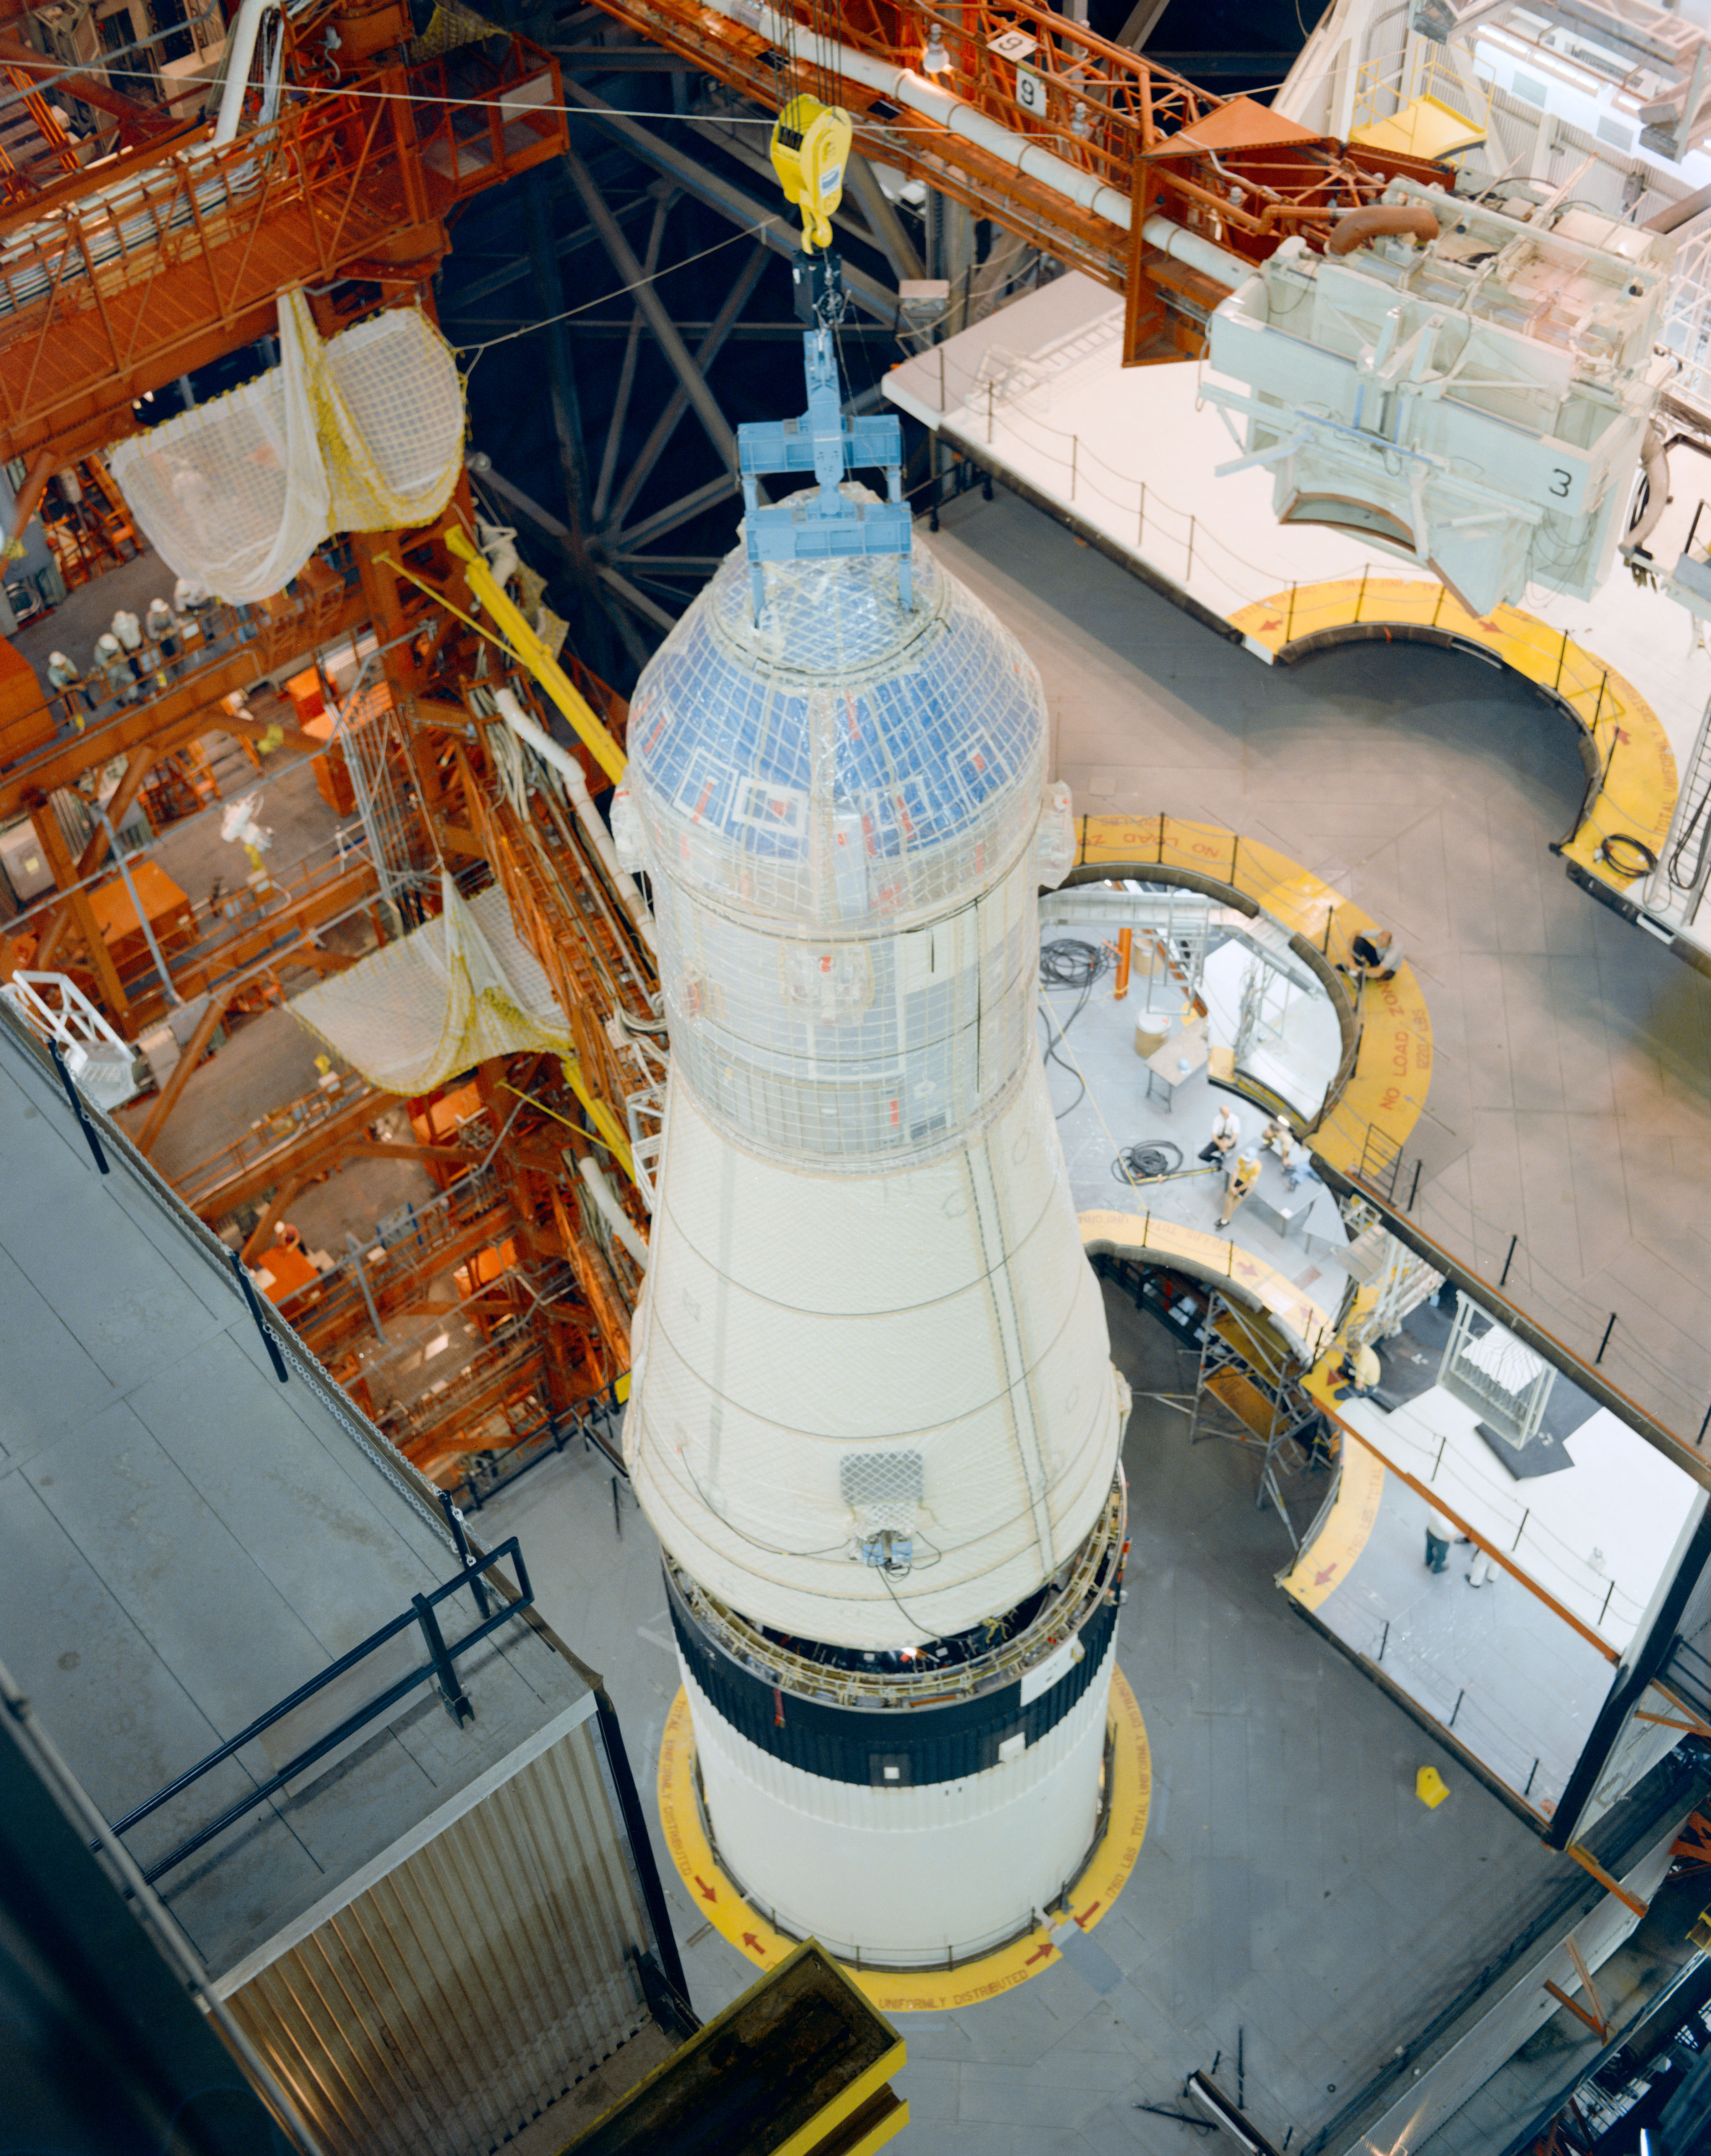 In KSC's Vehicle Assembly Building, workers lower the Apollo 11 spacecraft onto its Saturn V rocket